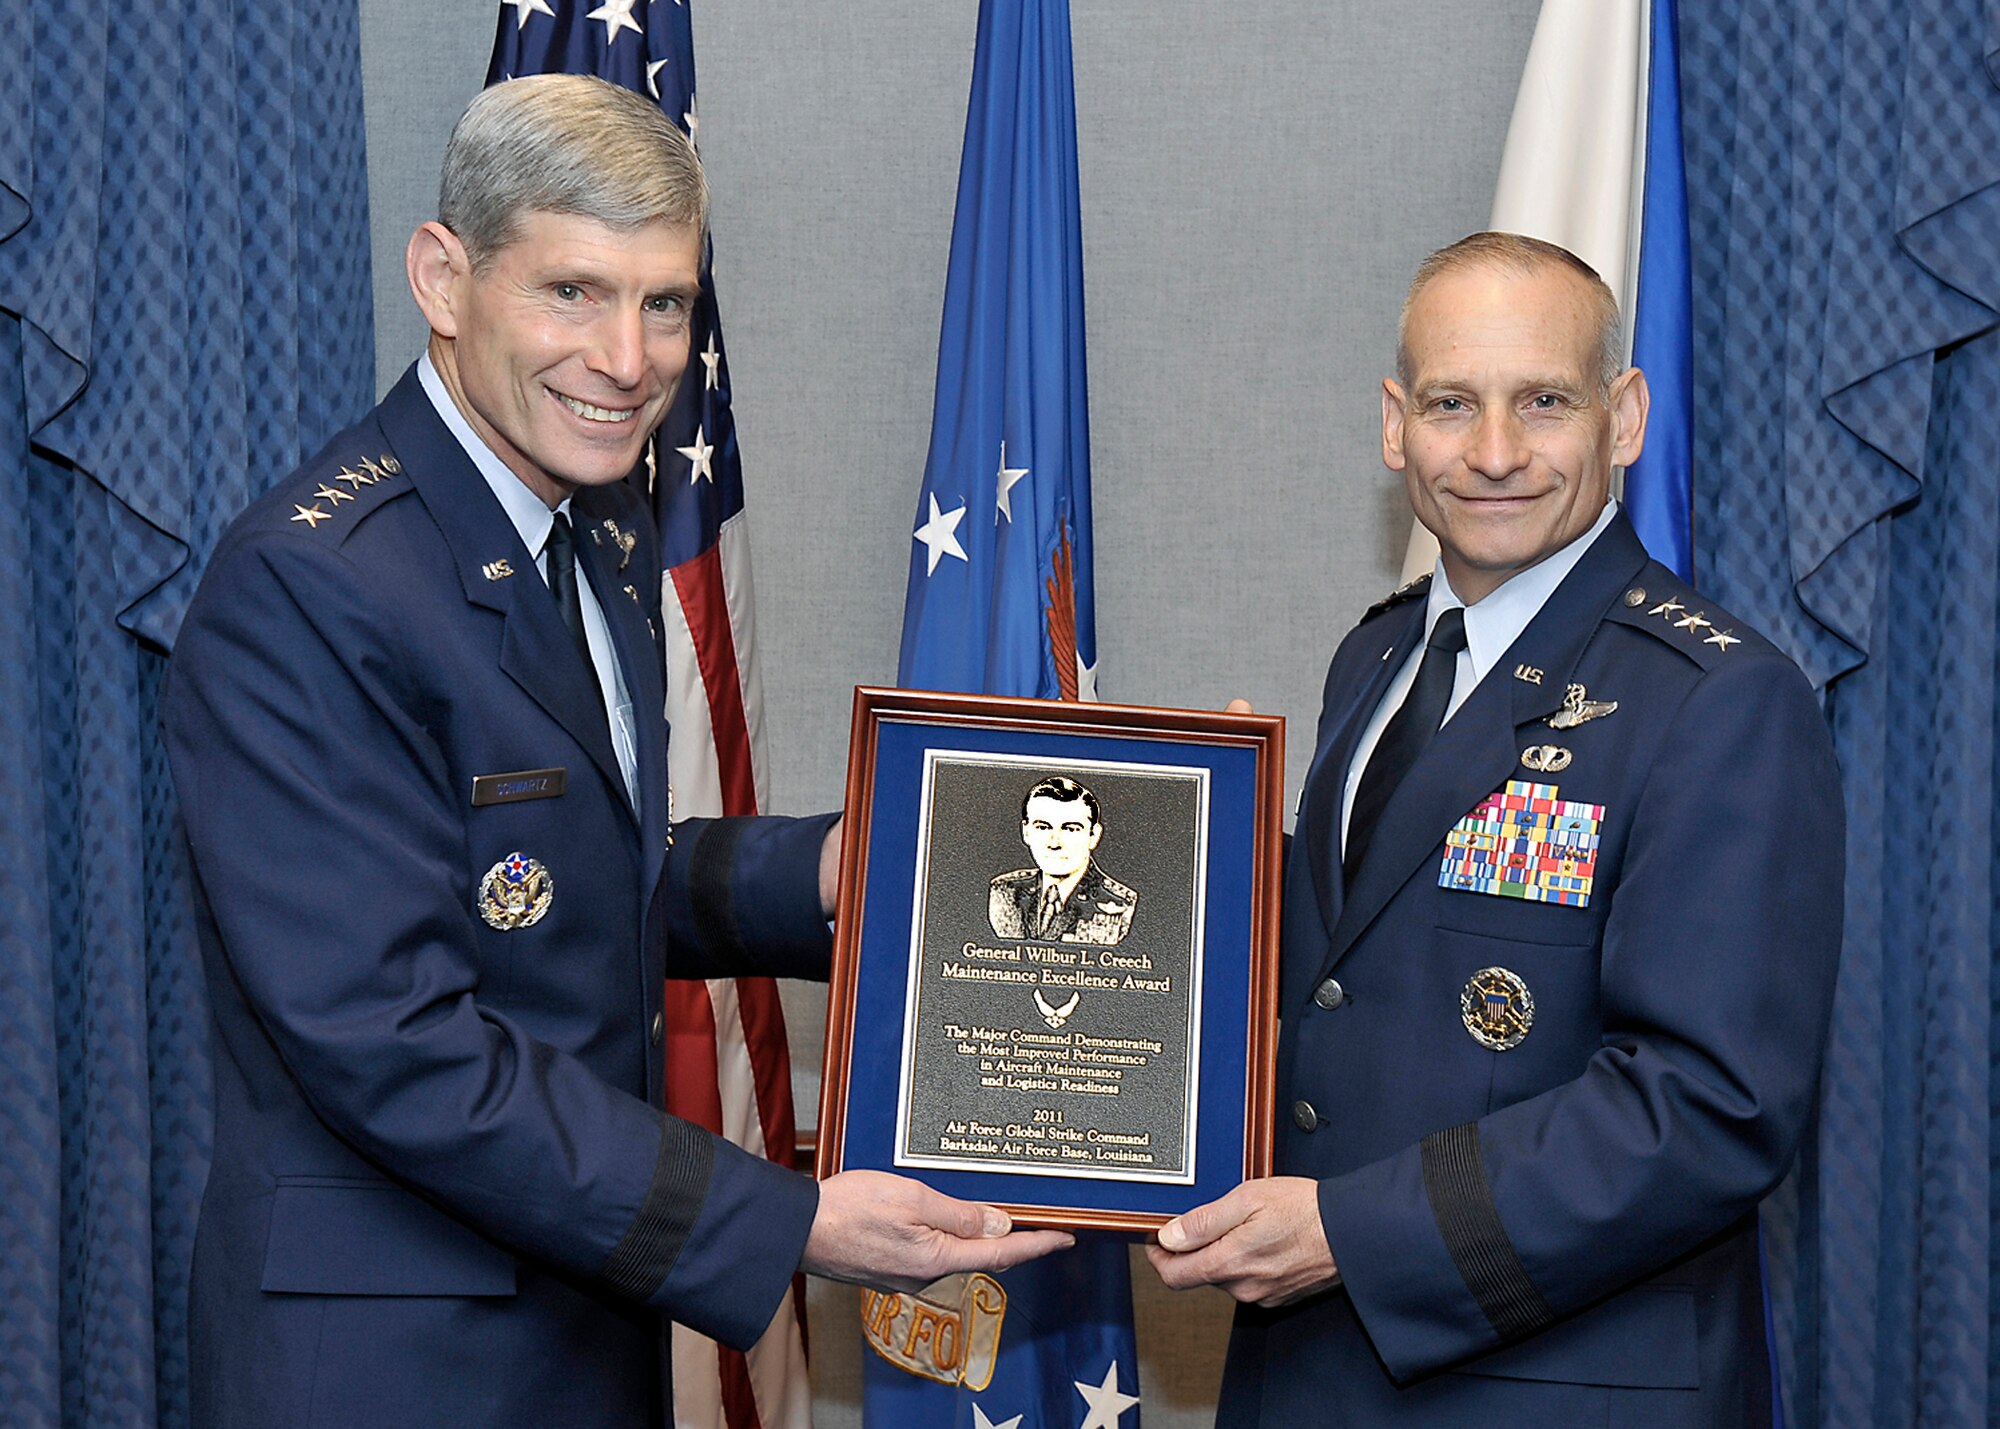 Air Force Chief of Staff Gen. Norton Schwartz presents Lt. Gen. James Kowalski, Air Force Global Strike Command commander, the Gen. Wilbur L. Creech Maintenance Excellence Award for 2011 during a ceremony at the Pentagon April 16, 2012.  The award is presented to the major command that demonstrates the most improved performance in aircraft maintenance and logistics readiness in a given fiscal year. (U.S. Air Force photo/Michael J. Pausic)